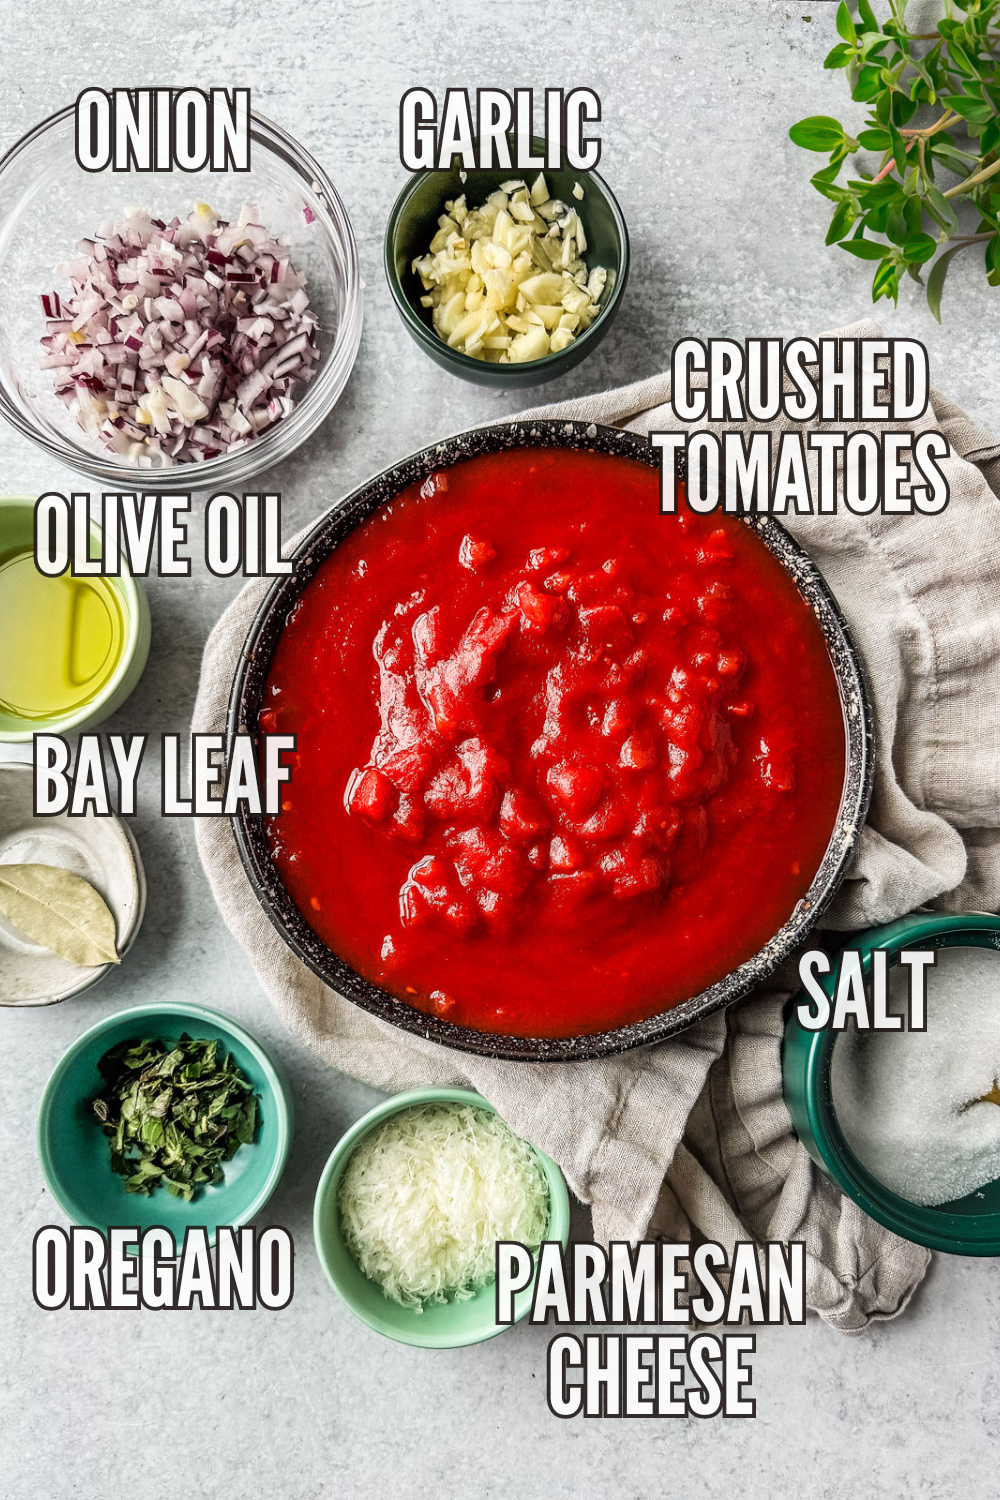 Display of the ingredients for the sauce.